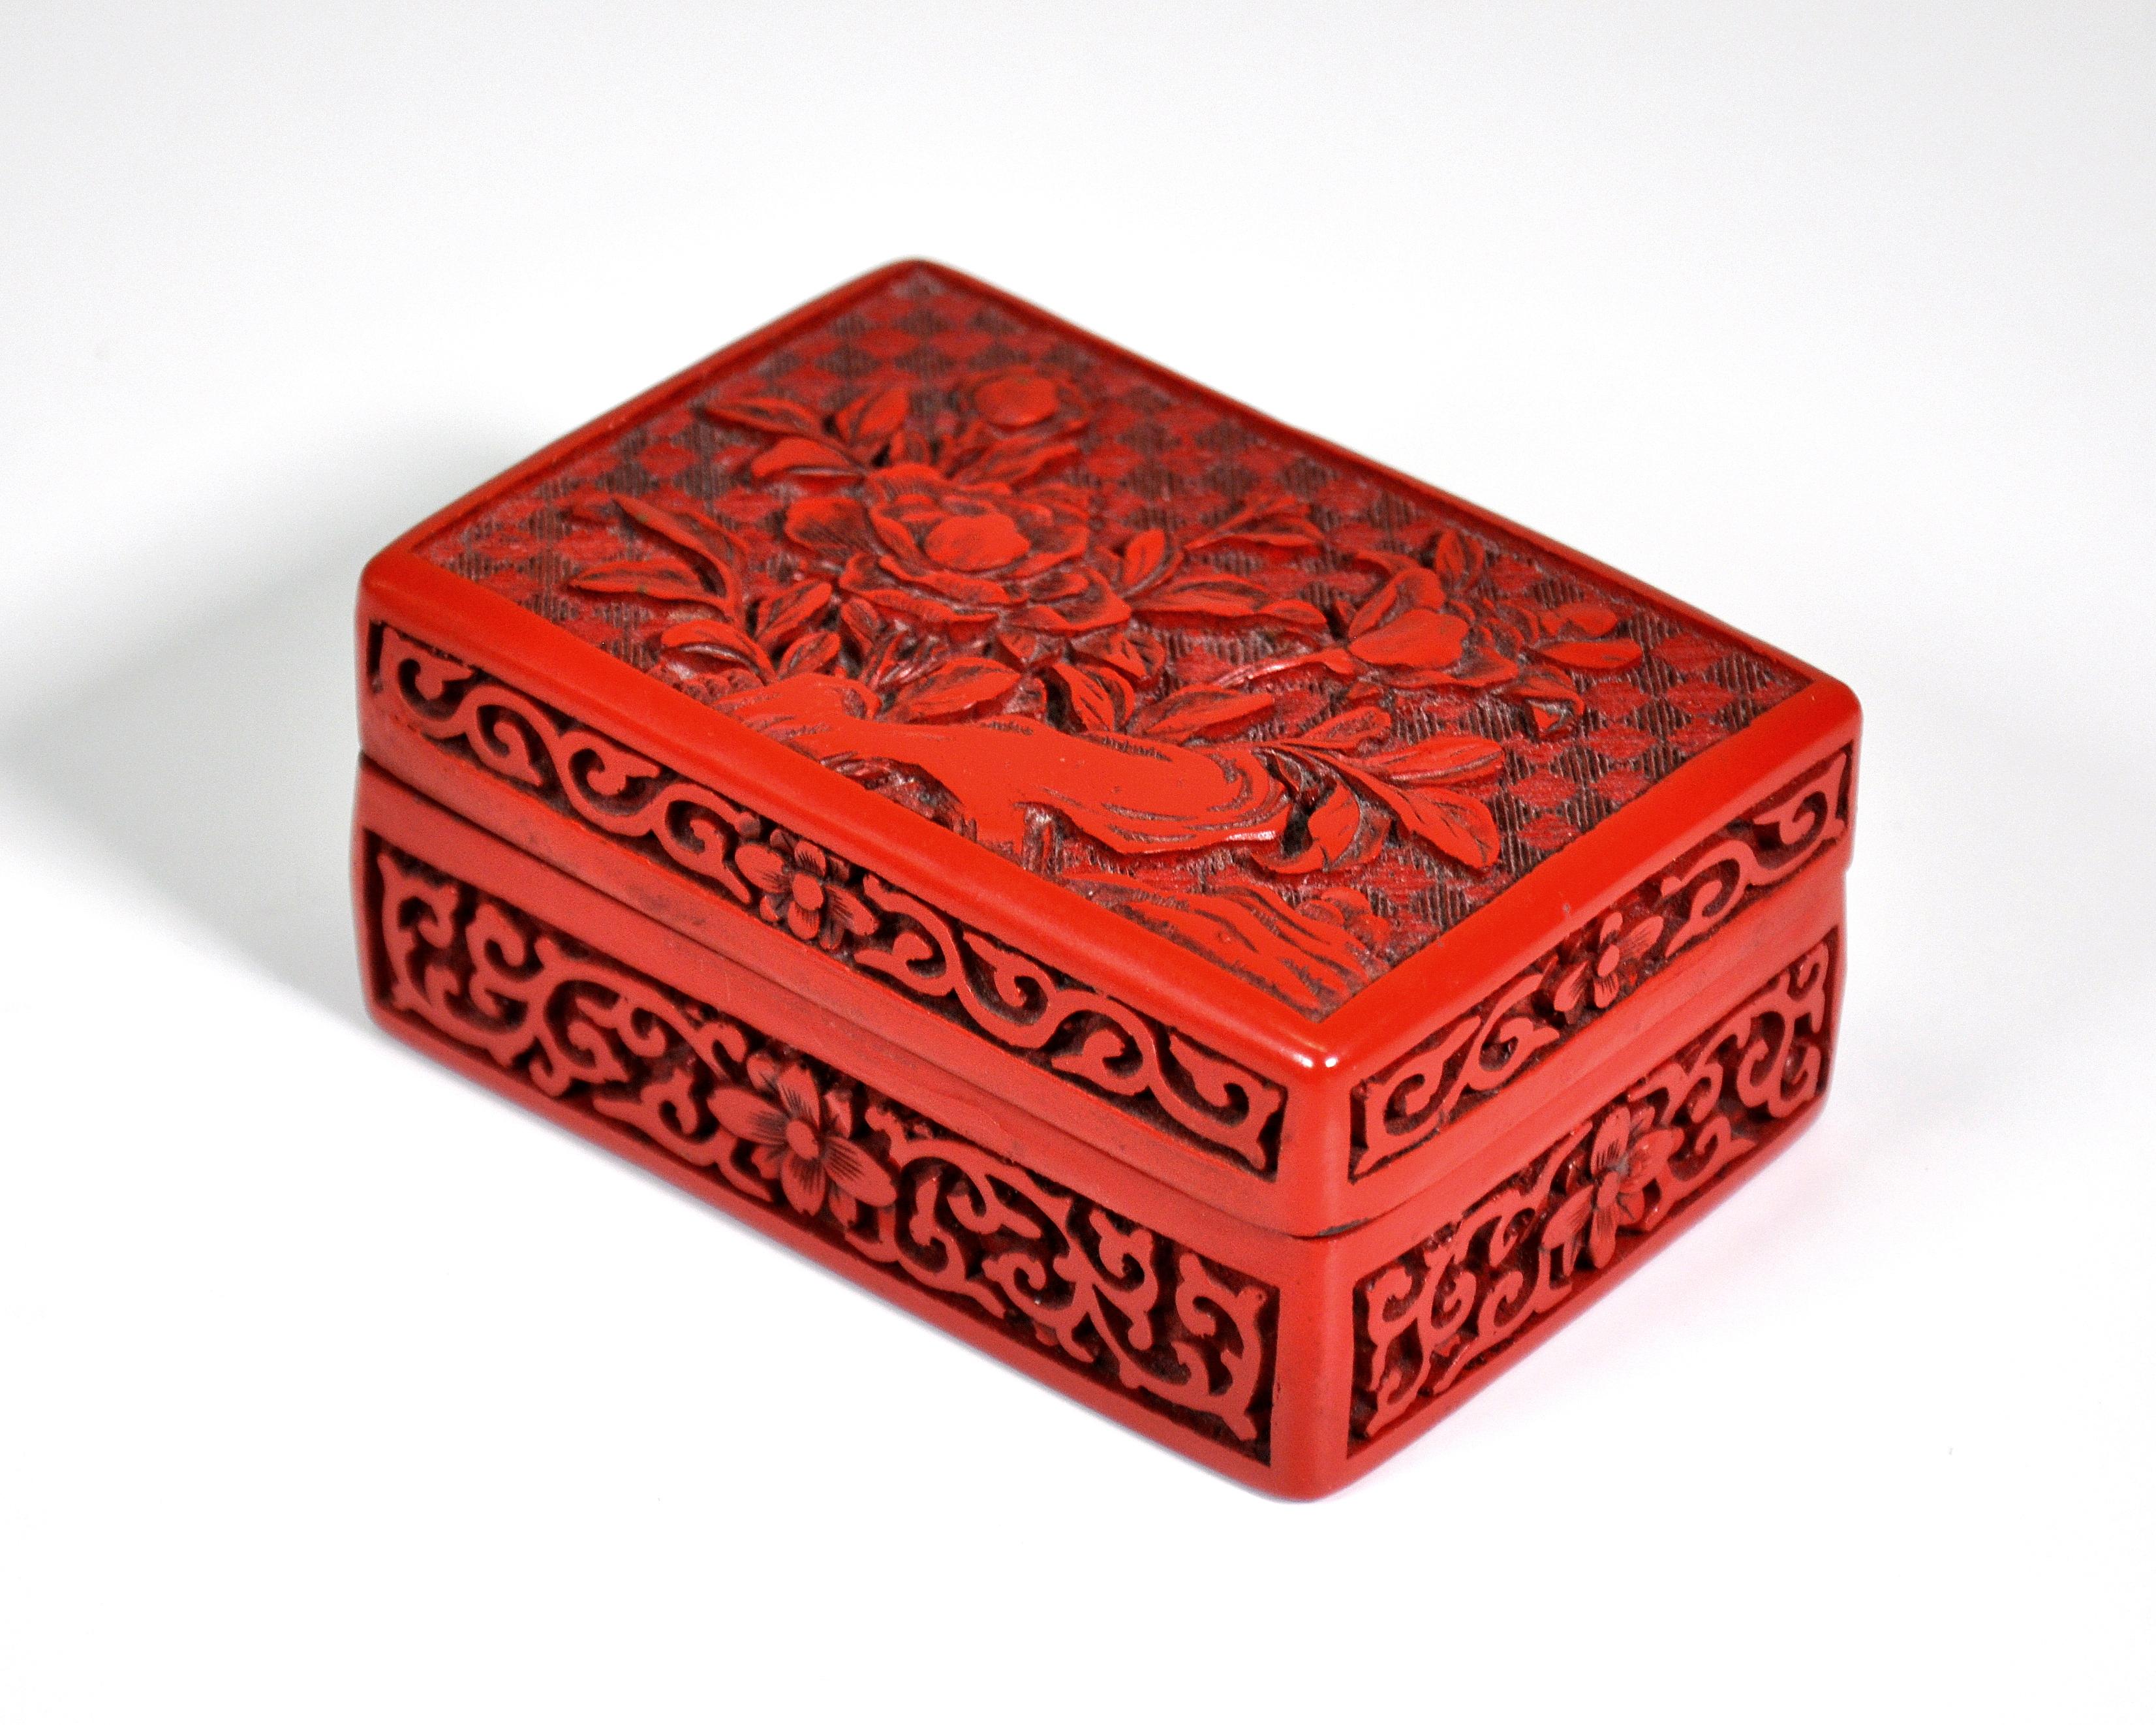 Vintage Chinese rectangular vanity, jewelry or trinket red cinnabar box with carved lid depicting flowers, leaves and geometric motifs with black lacquer interior.